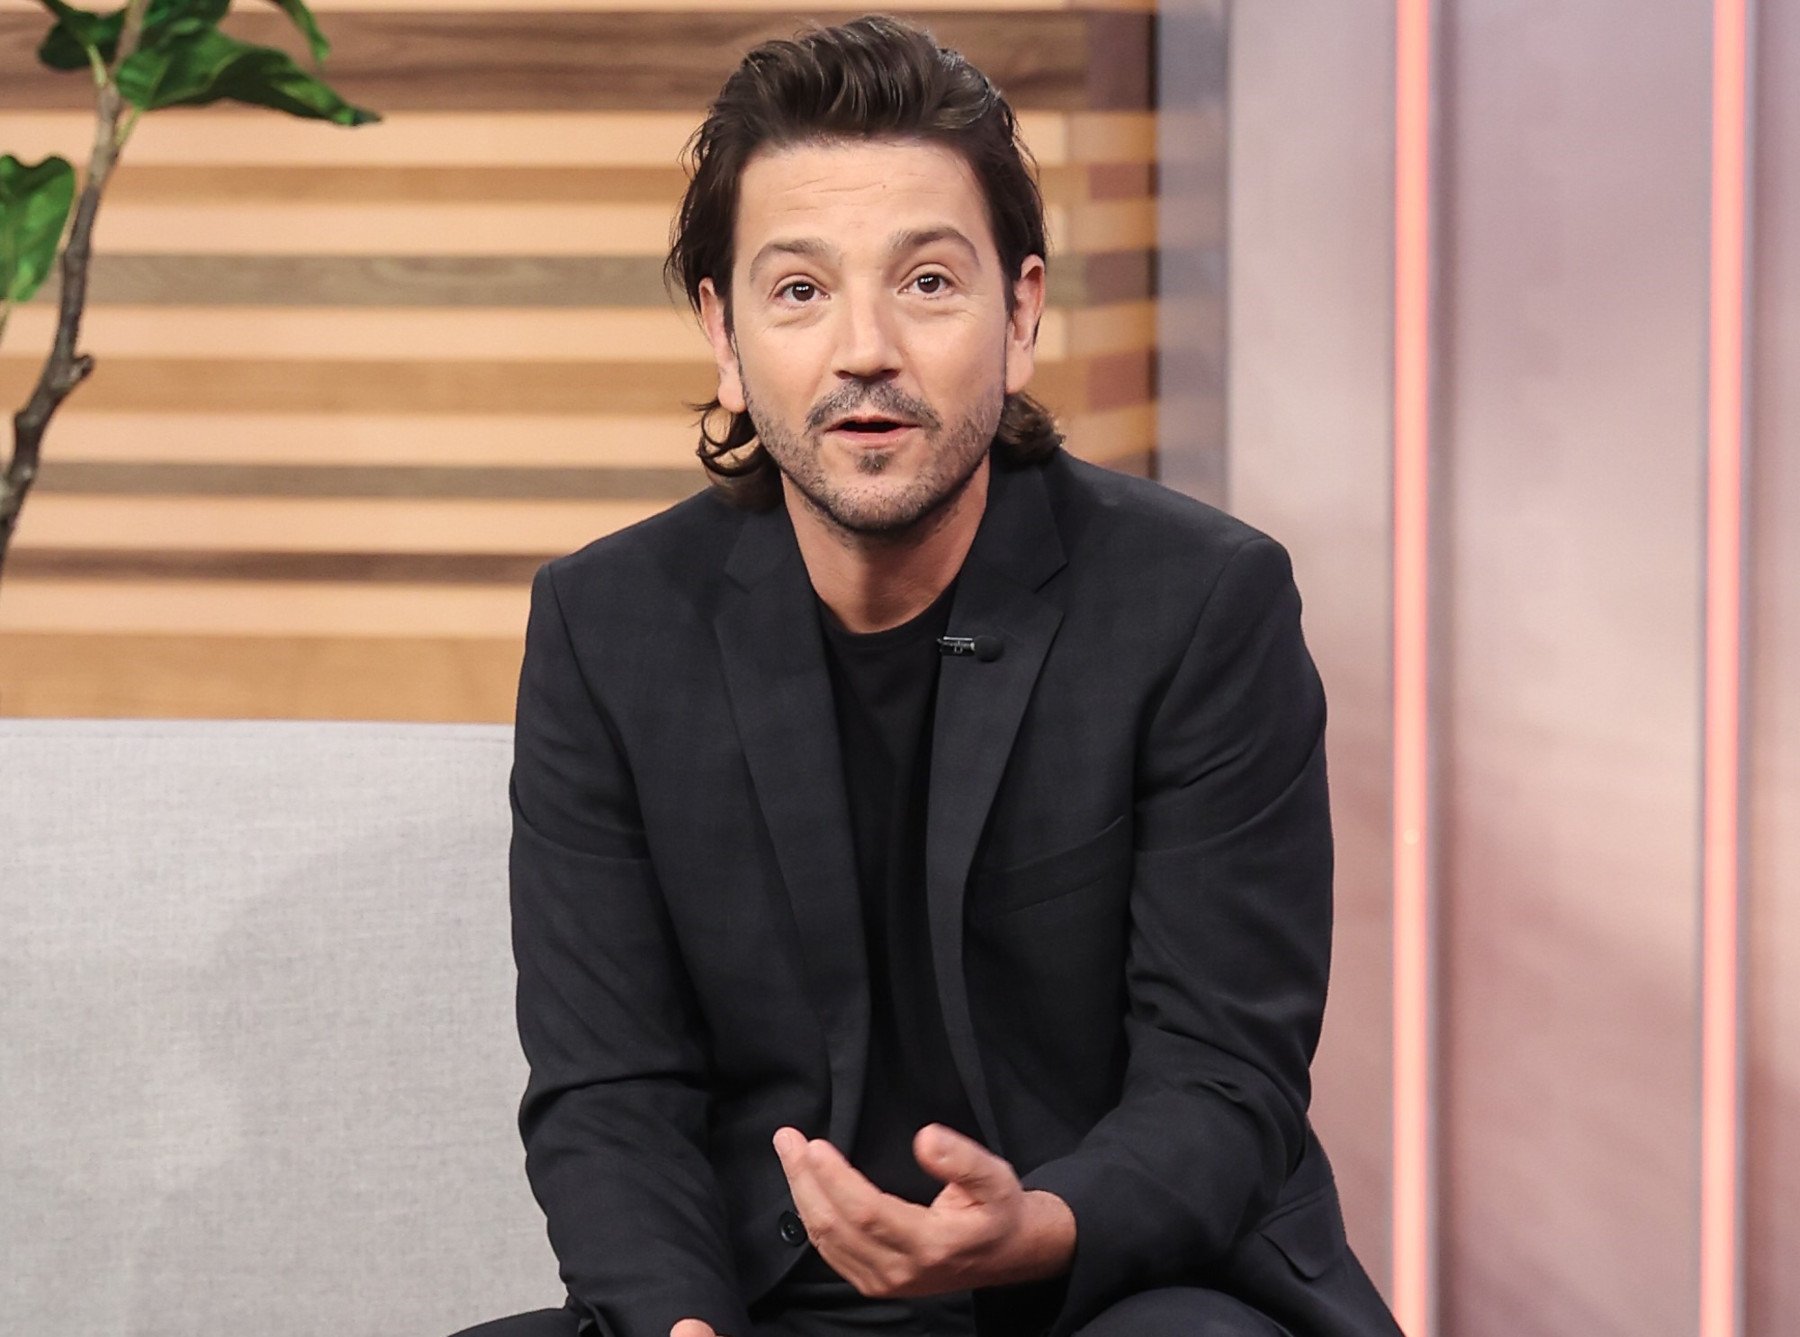 Cassian Andor actor Diego Luna. He is sitting, wearing a black suit and speaking.